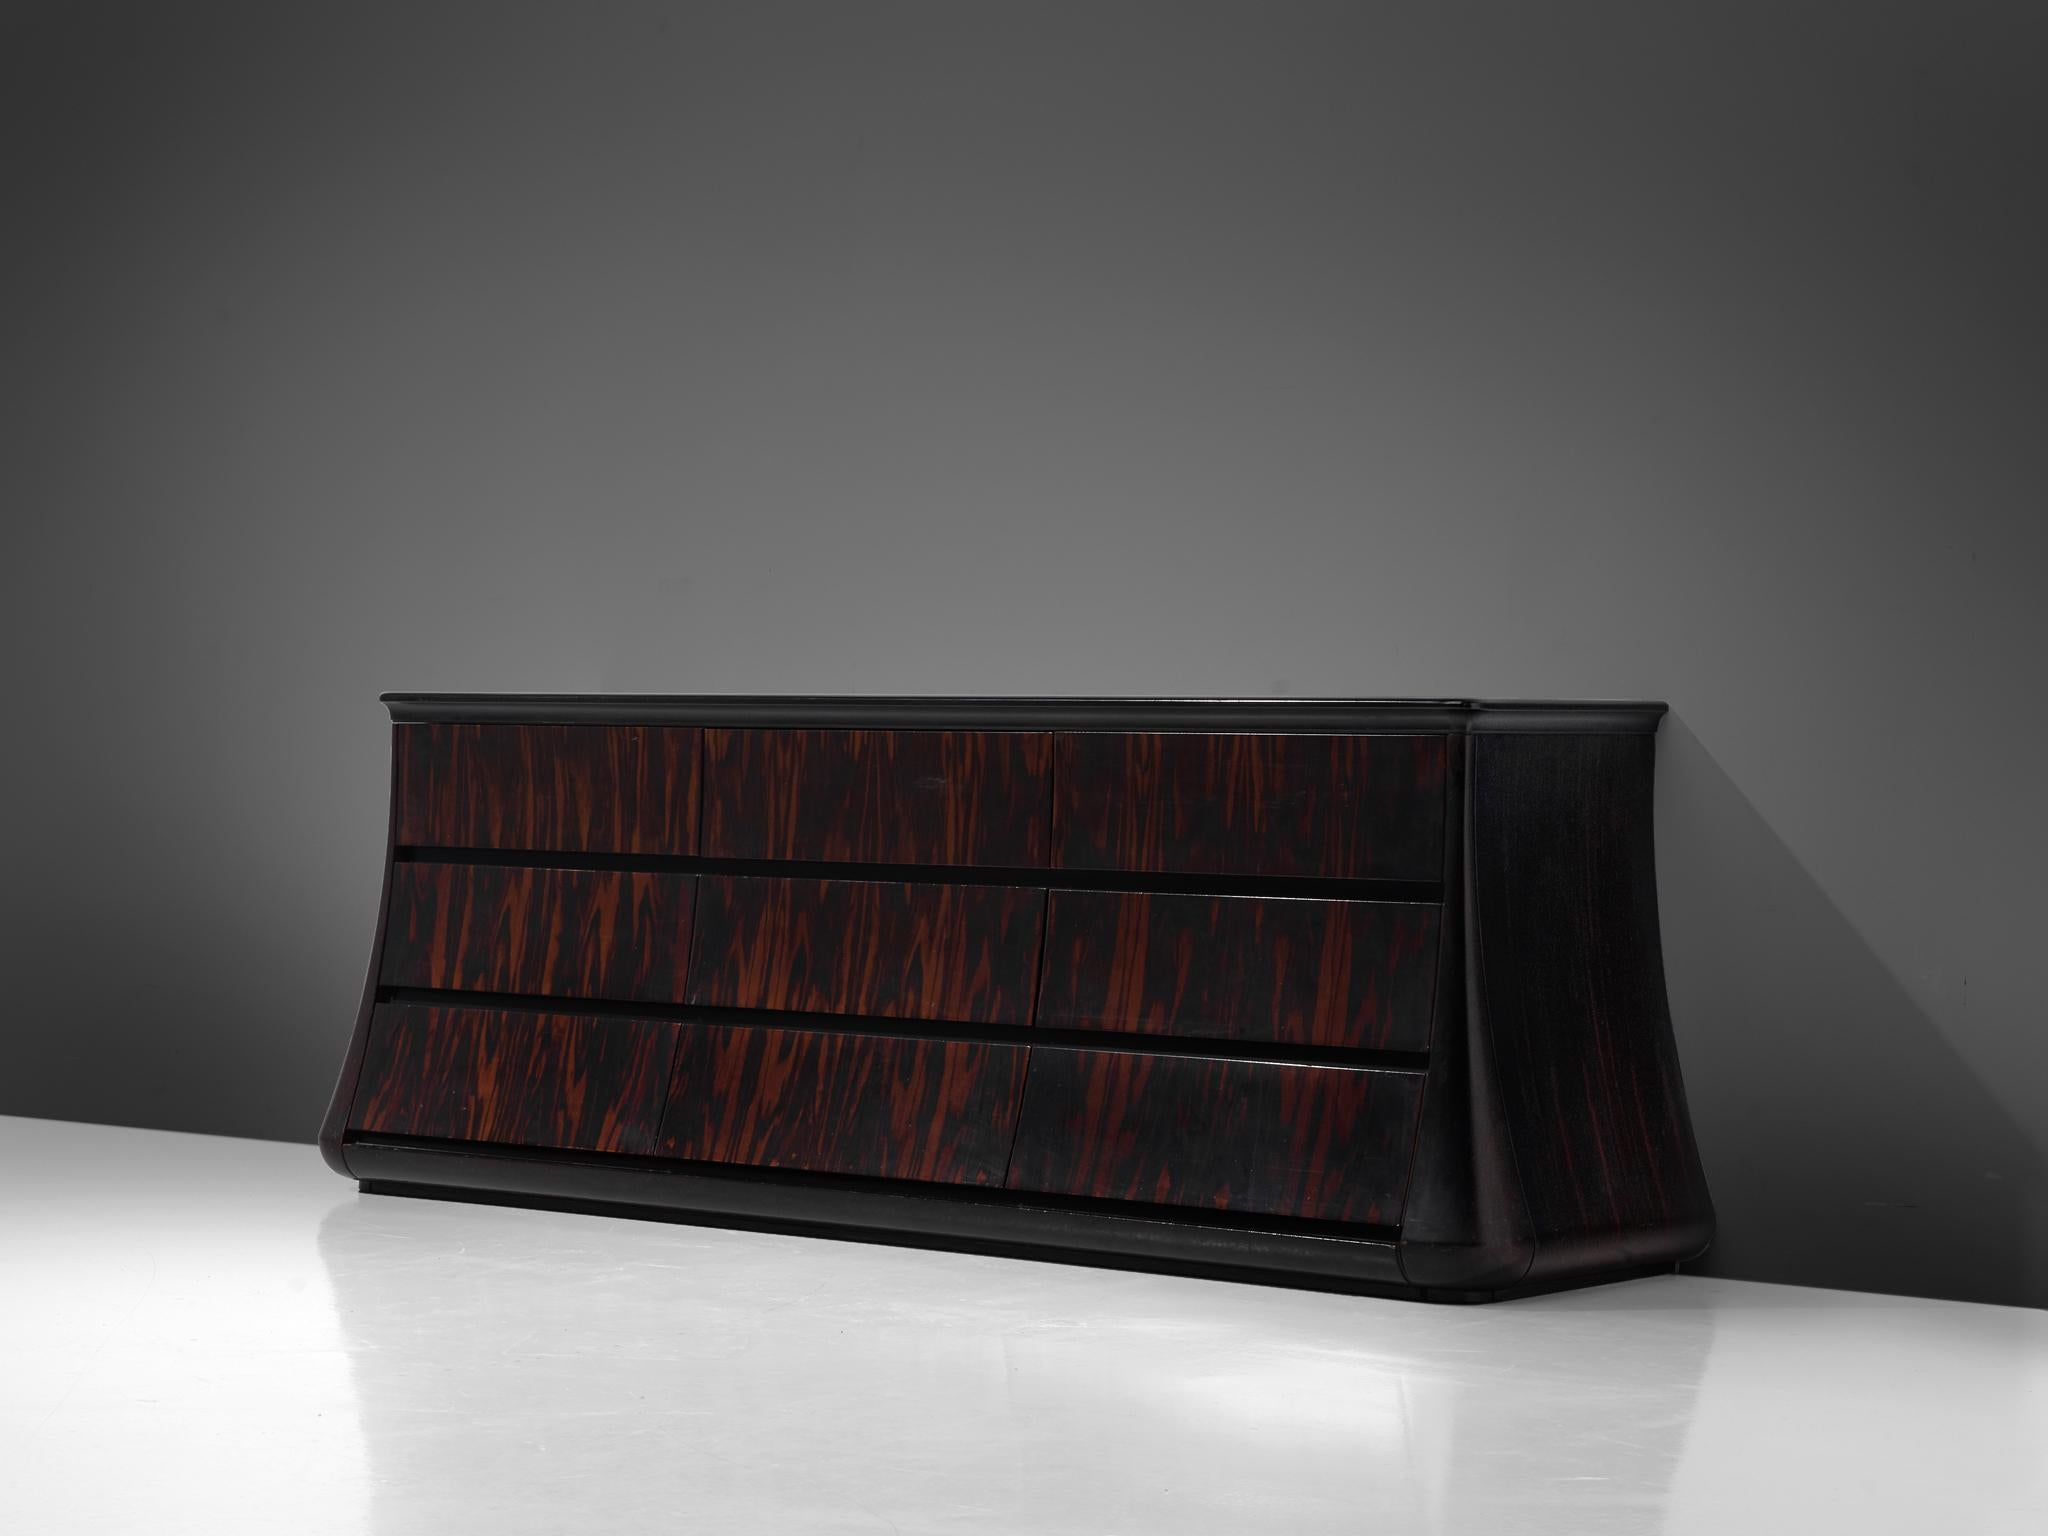 Luciano Figerio for Frigerio Di Desio, sideboard, Macassar ebony, Italy, circa 1966.

Chest of drawers designed by the Italian Luciano Frigerio. The cabinet is executed in rare Macassar ebony wood, which is known for its almost black color with warm